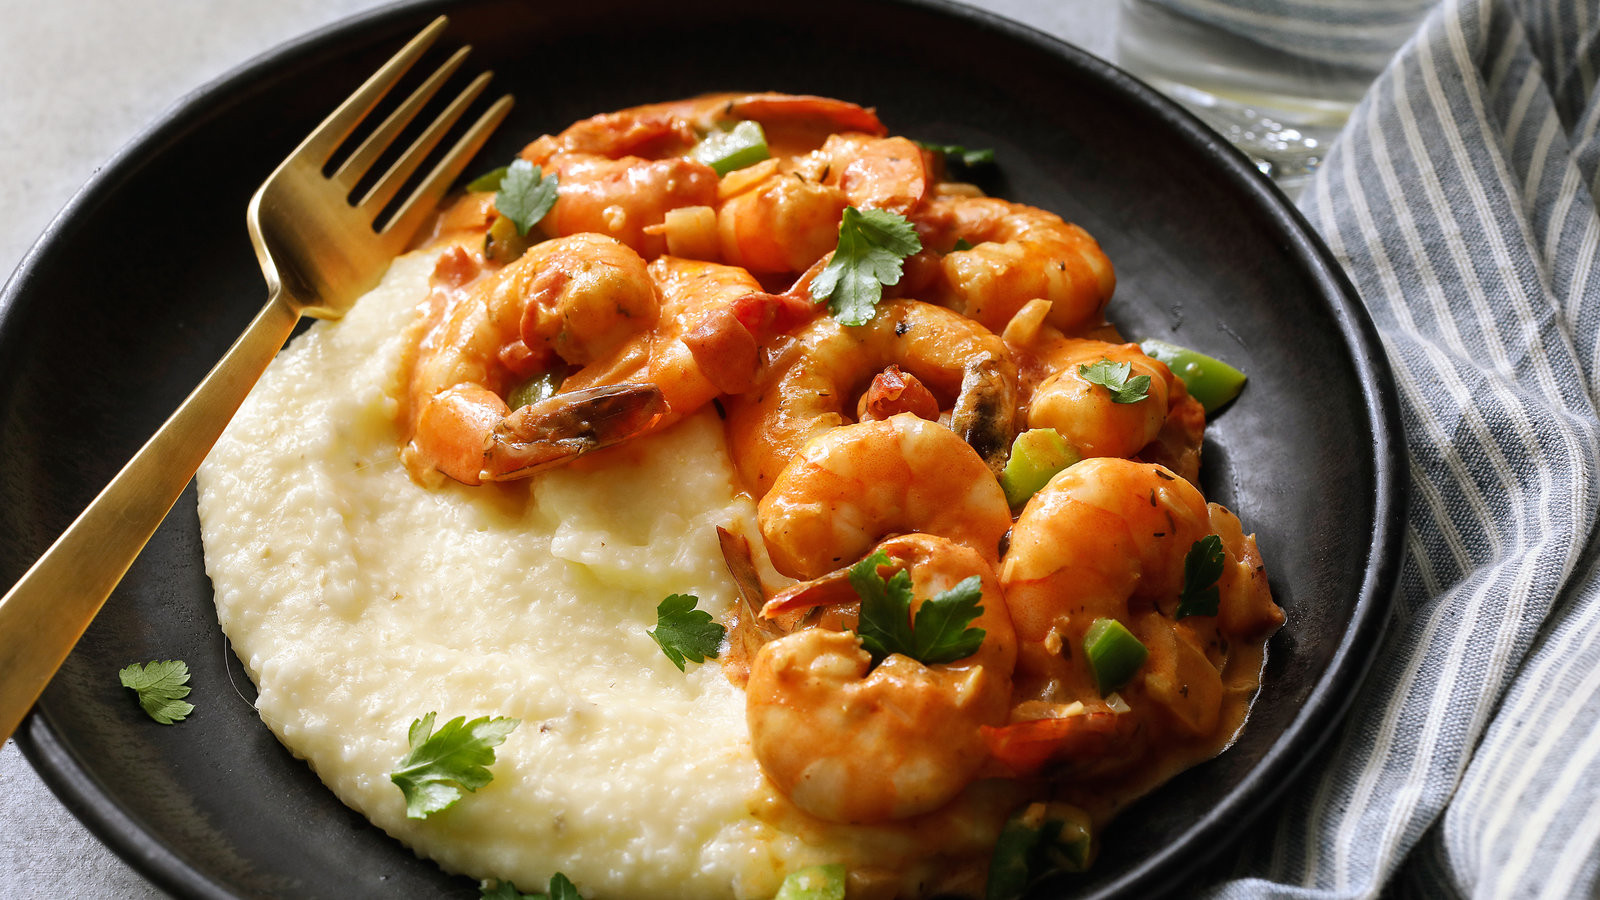 Shrimp Breakfast Recipes Luxury Shrimp and Grits Recipe Nyt Cooking